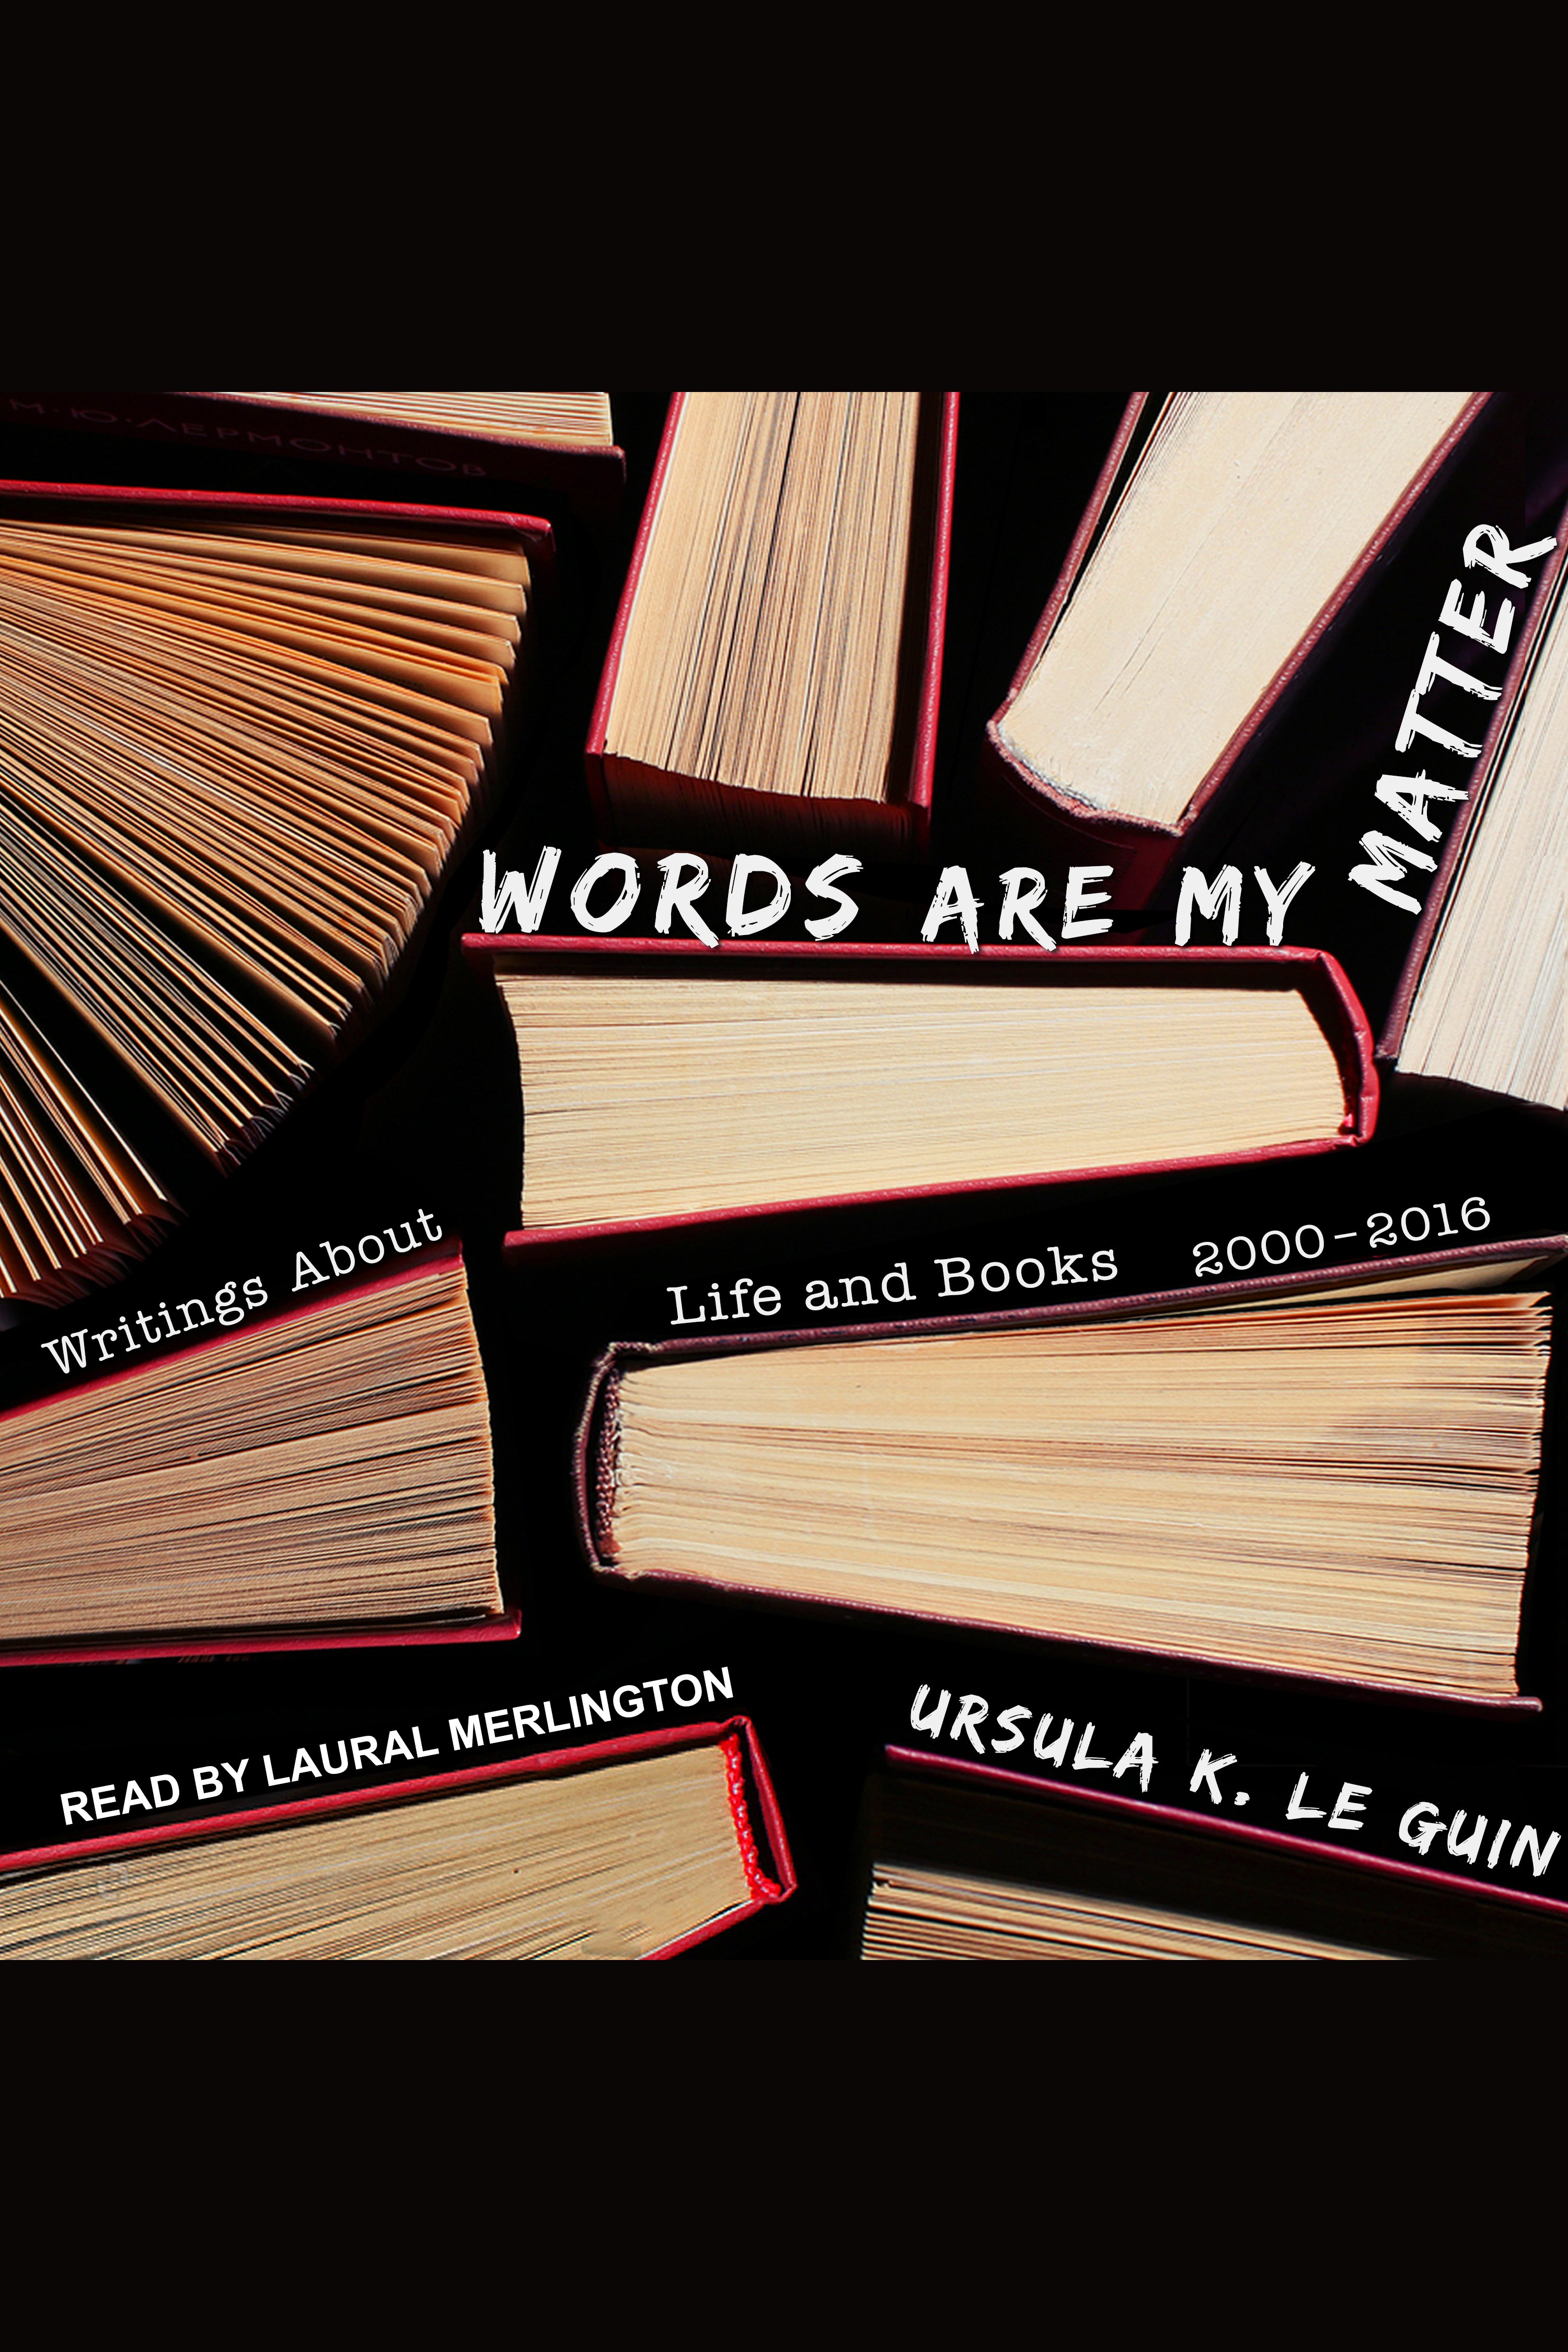 Words are my matter cover image